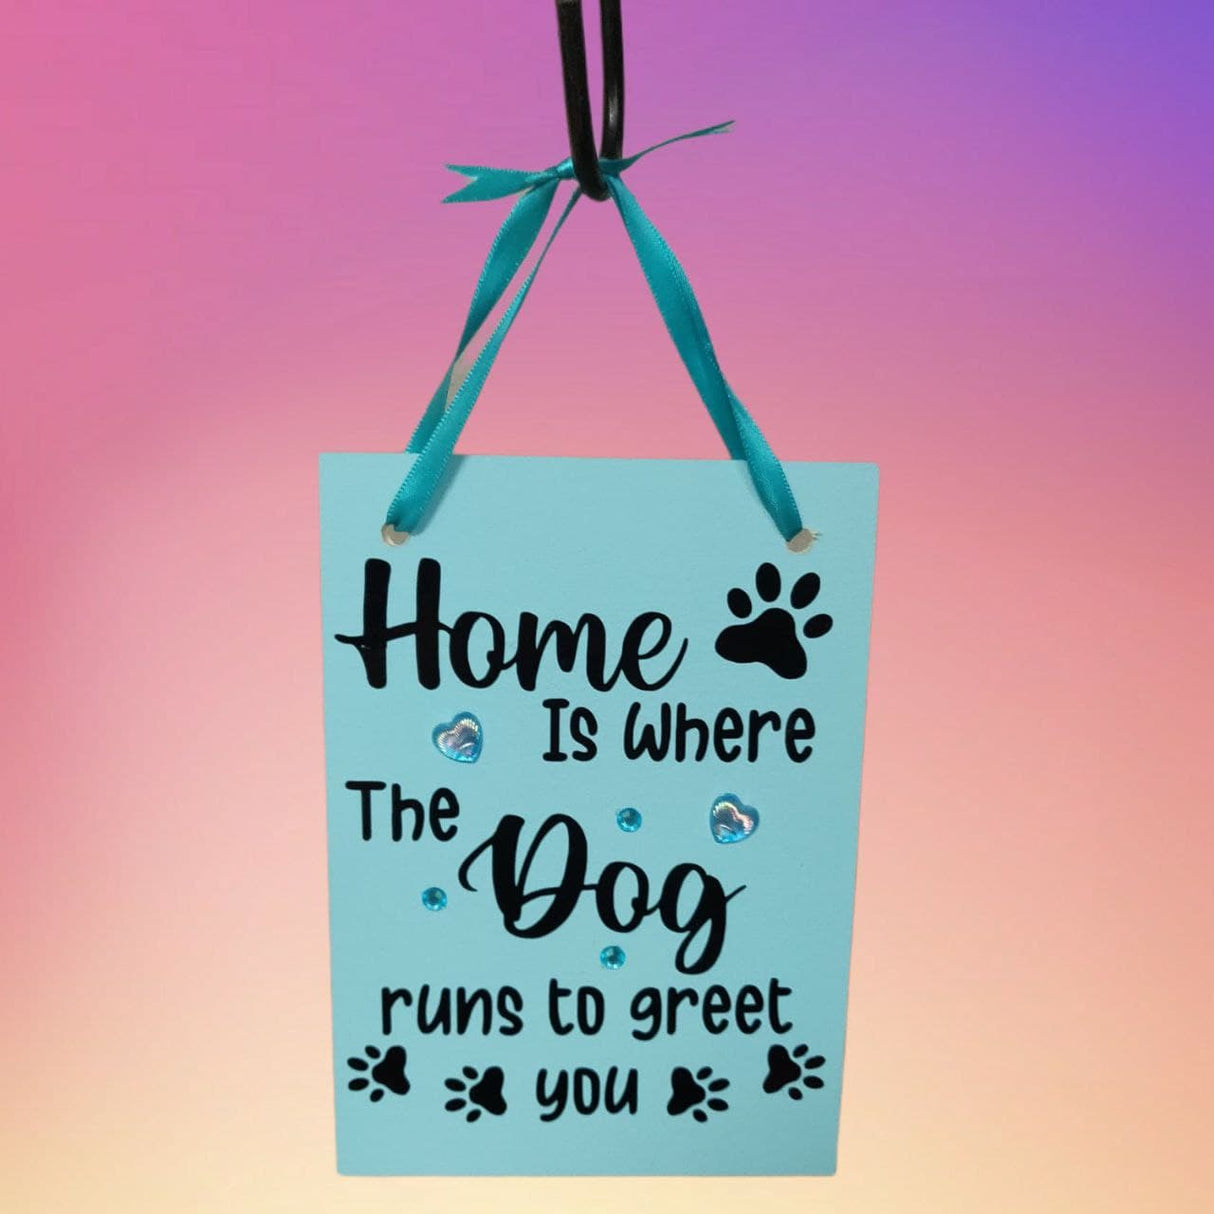 Home - Dog Greets You